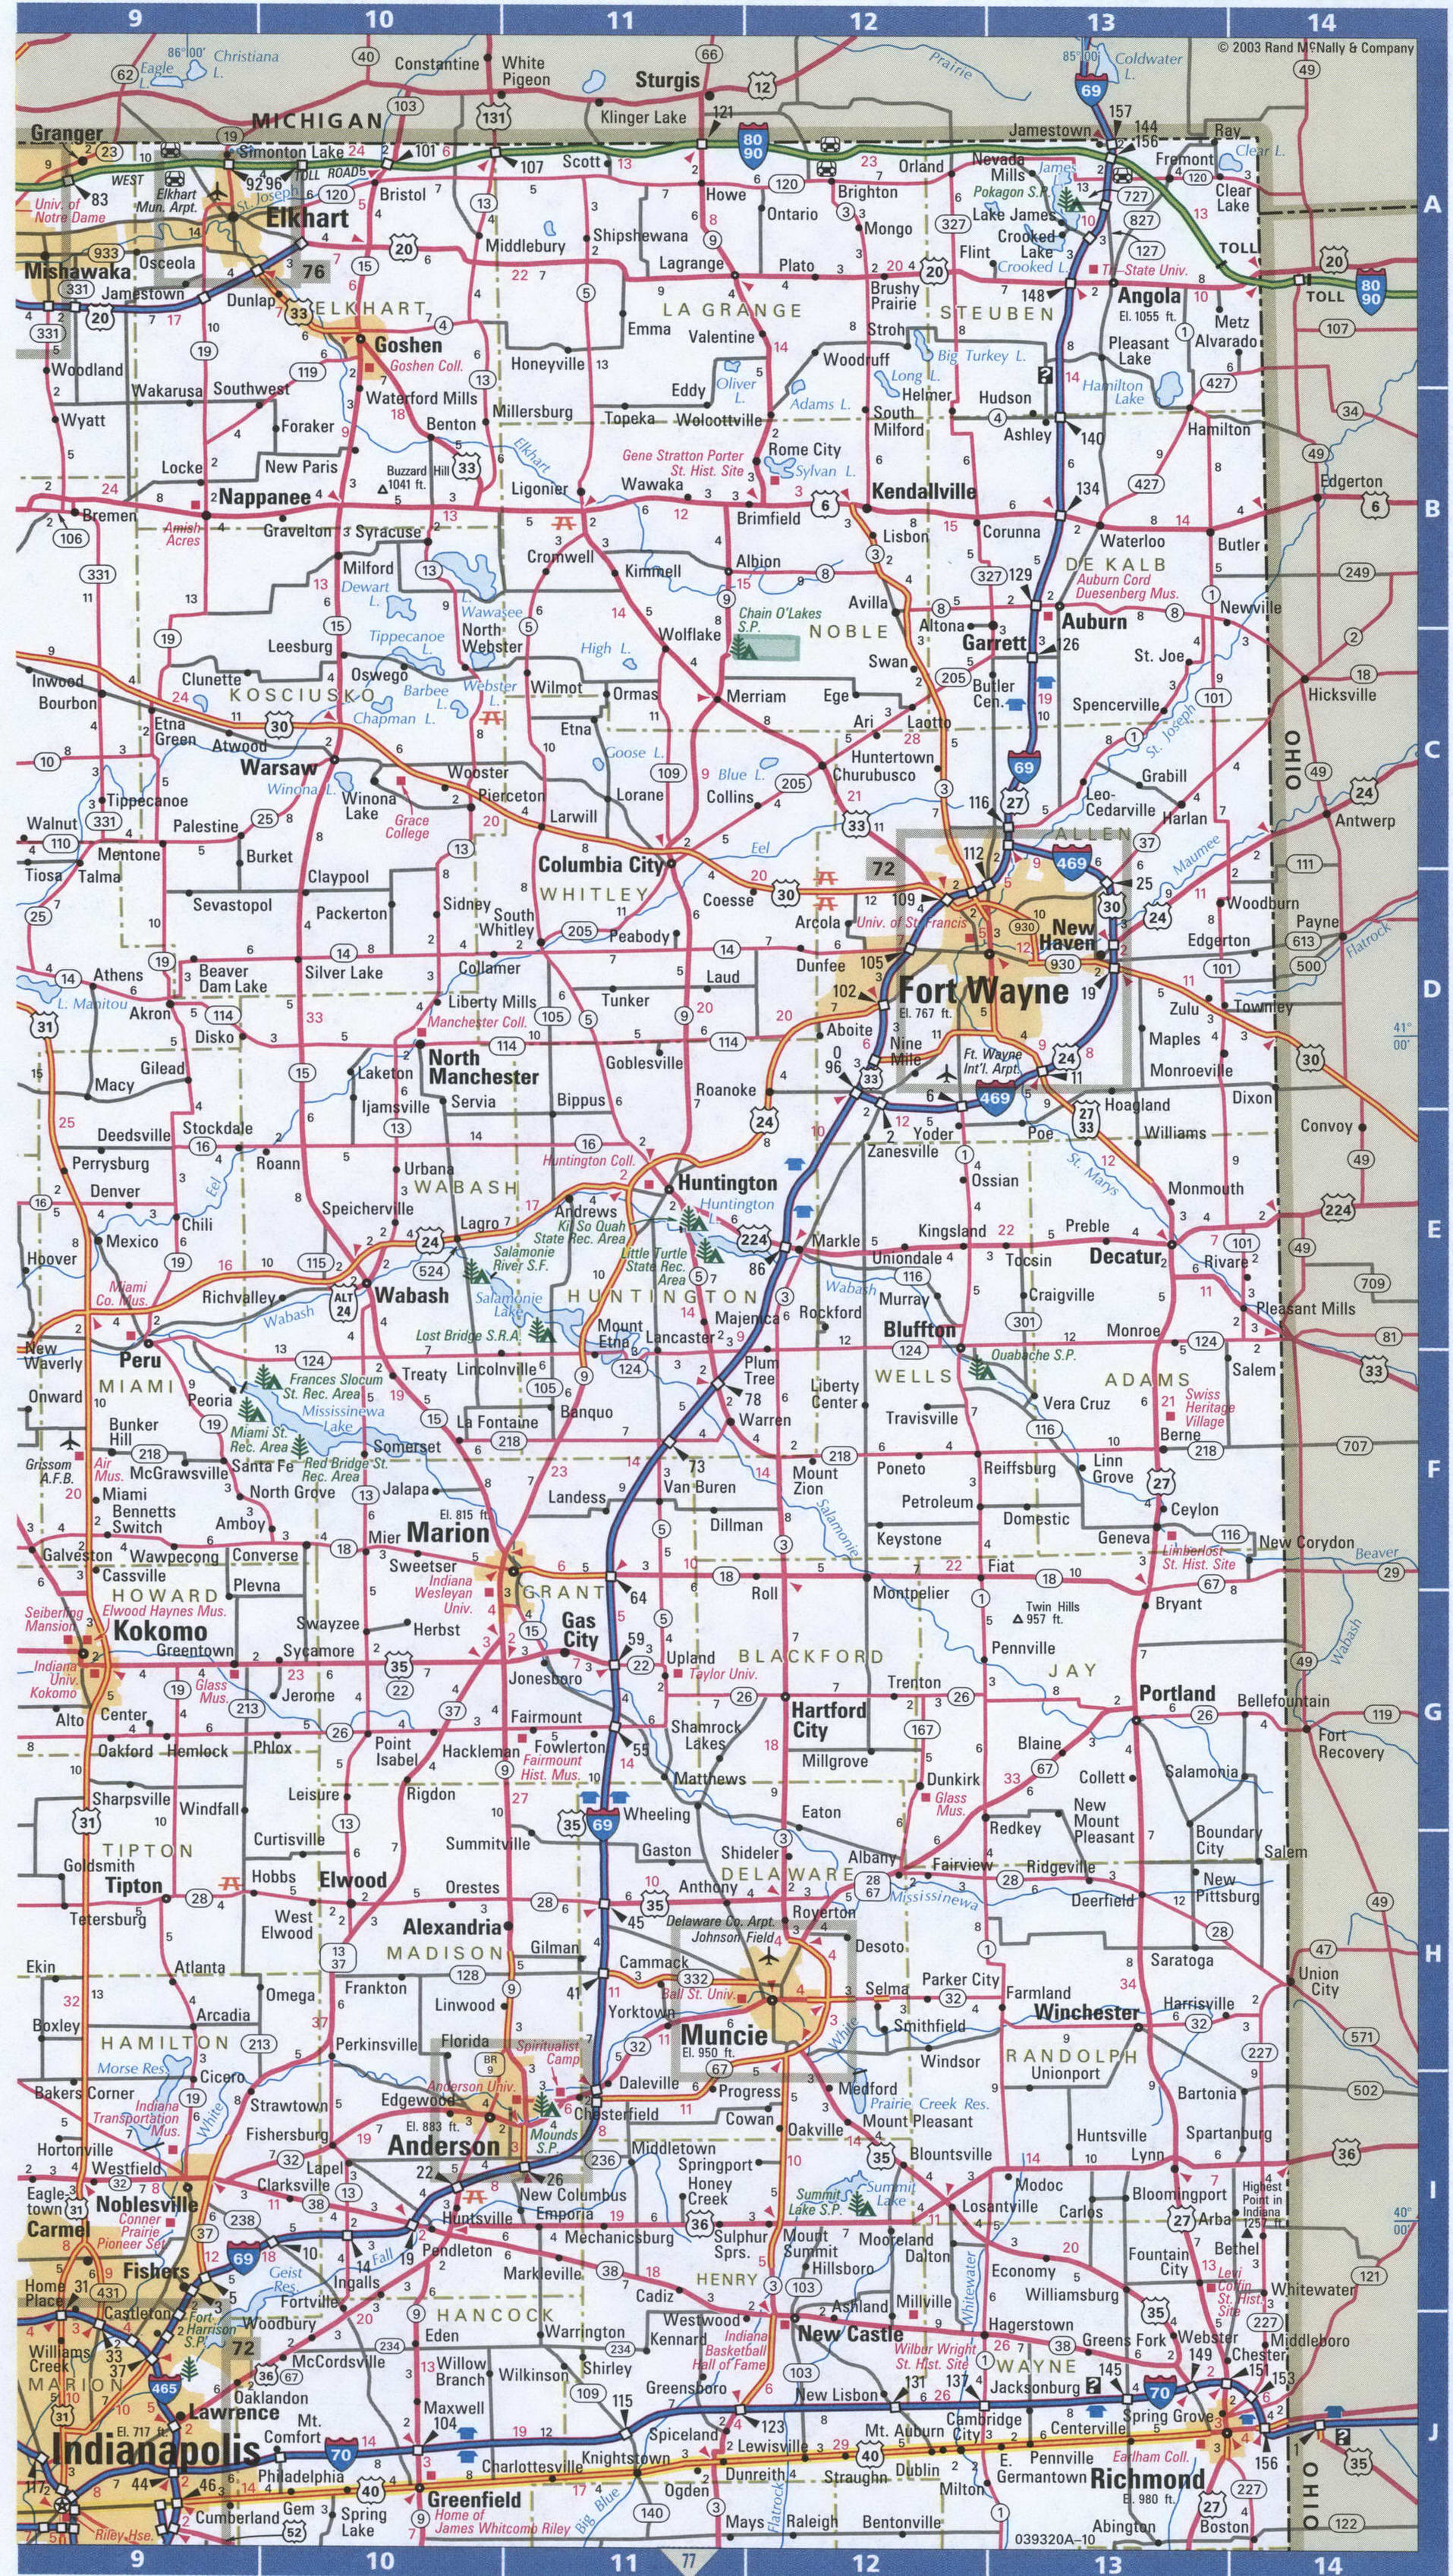 Indiana Northern roads map.Map of North Indiana cities and highways